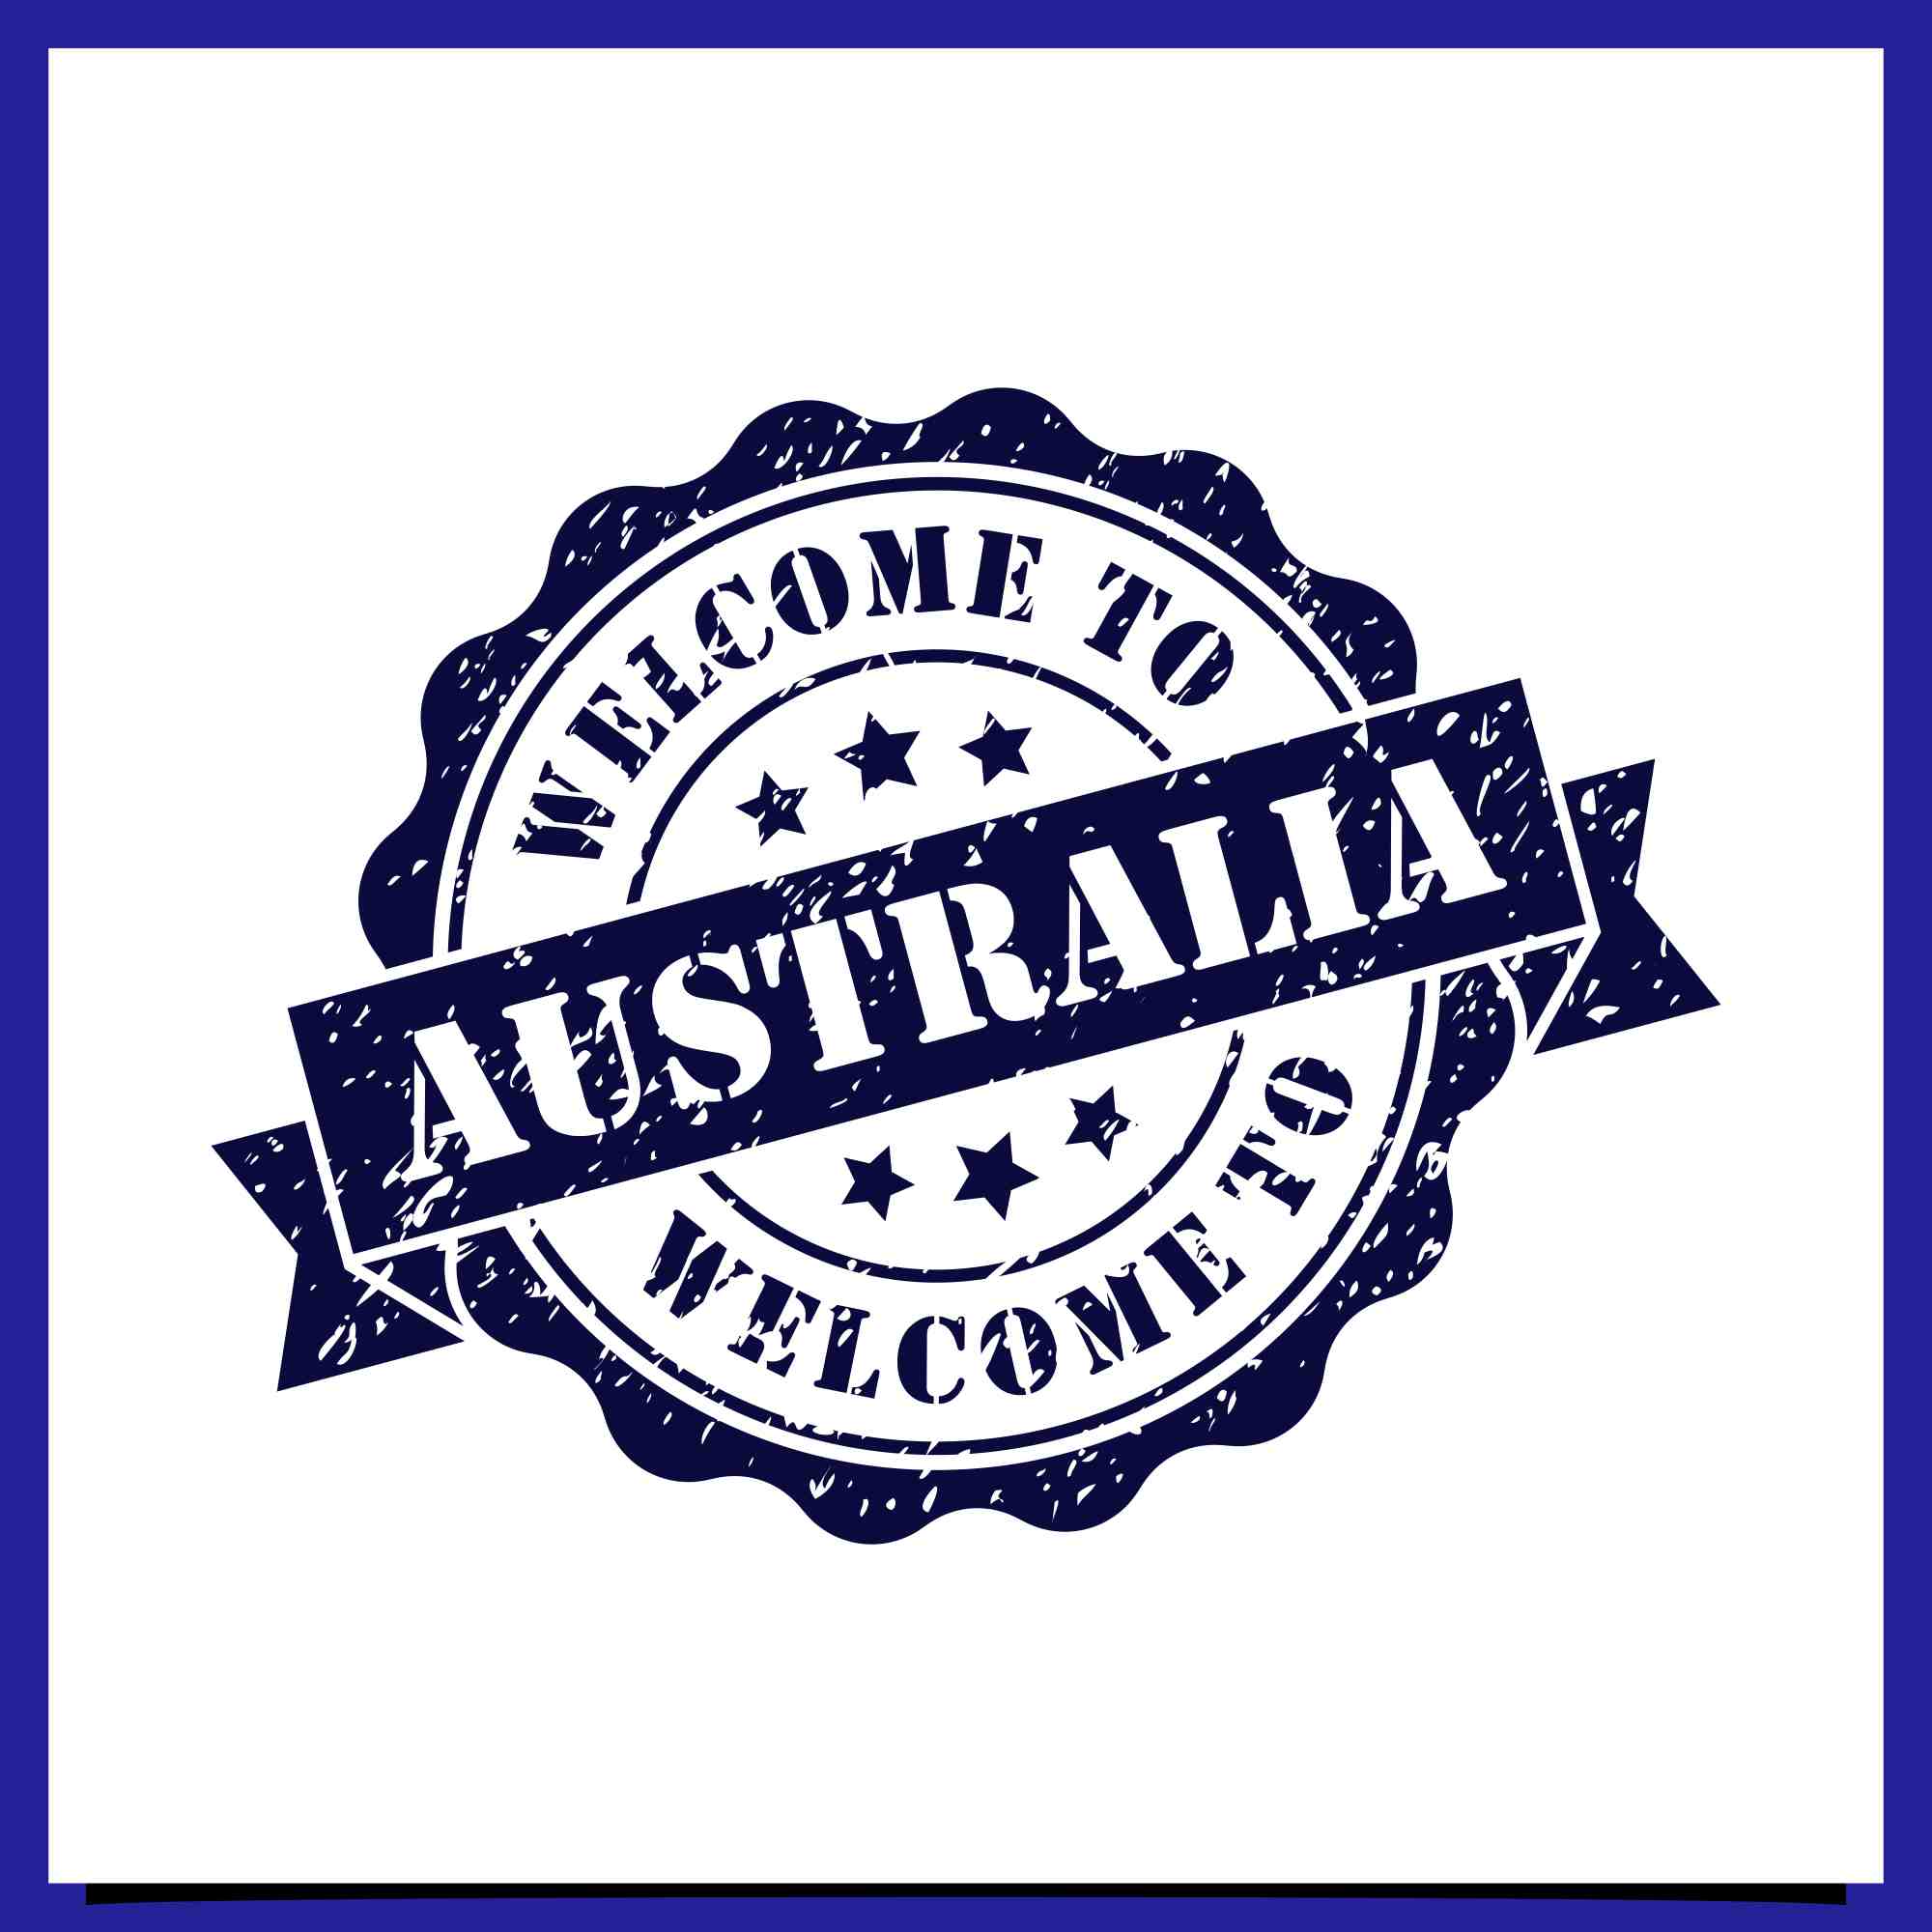 welcome to Sydney Australia stamps logo design collection - $4 preview image.